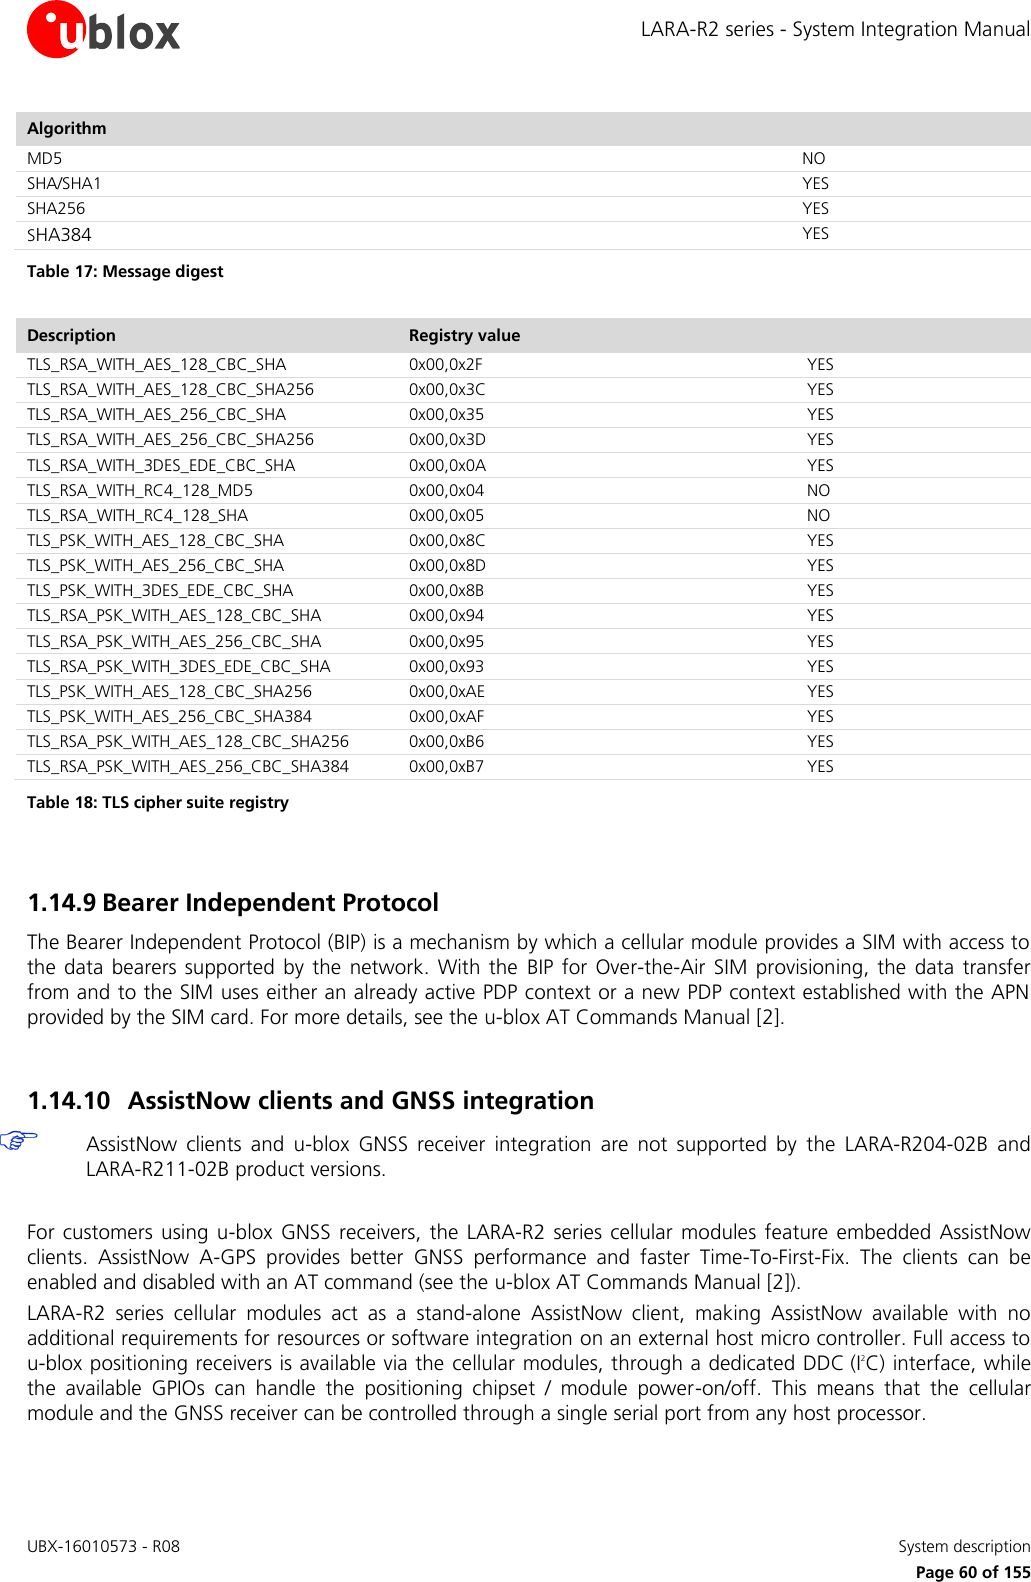 LARA-R2 series - System Integration Manual UBX-16010573 - R08    System description     Page 60 of 155 Algorithm   MD5  NO SHA/SHA1  YES SHA256  YES SHA384  YES Table 17: Message digest  Description Registry value   TLS_RSA_WITH_AES_128_CBC_SHA 0x00,0x2F  YES TLS_RSA_WITH_AES_128_CBC_SHA256 0x00,0x3C  YES TLS_RSA_WITH_AES_256_CBC_SHA 0x00,0x35  YES TLS_RSA_WITH_AES_256_CBC_SHA256 0x00,0x3D  YES TLS_RSA_WITH_3DES_EDE_CBC_SHA 0x00,0x0A  YES TLS_RSA_WITH_RC4_128_MD5 0x00,0x04  NO TLS_RSA_WITH_RC4_128_SHA 0x00,0x05  NO TLS_PSK_WITH_AES_128_CBC_SHA 0x00,0x8C  YES TLS_PSK_WITH_AES_256_CBC_SHA 0x00,0x8D  YES TLS_PSK_WITH_3DES_EDE_CBC_SHA 0x00,0x8B  YES TLS_RSA_PSK_WITH_AES_128_CBC_SHA 0x00,0x94  YES TLS_RSA_PSK_WITH_AES_256_CBC_SHA 0x00,0x95  YES TLS_RSA_PSK_WITH_3DES_EDE_CBC_SHA 0x00,0x93  YES TLS_PSK_WITH_AES_128_CBC_SHA256 0x00,0xAE  YES TLS_PSK_WITH_AES_256_CBC_SHA384 0x00,0xAF  YES TLS_RSA_PSK_WITH_AES_128_CBC_SHA256 0x00,0xB6  YES TLS_RSA_PSK_WITH_AES_256_CBC_SHA384 0x00,0xB7  YES Table 18: TLS cipher suite registry  1.14.9 Bearer Independent Protocol The Bearer Independent Protocol (BIP) is a mechanism by which a cellular module provides a SIM with access to the  data  bearers  supported  by  the  network.  With  the  BIP  for  Over-the-Air SIM  provisioning,  the  data  transfer from and to the SIM uses either an already active PDP context or a new PDP context established with the APN provided by the SIM card. For more details, see the u-blox AT Commands Manual [2].  1.14.10 AssistNow clients and GNSS integration  AssistNow  clients  and  u-blox  GNSS  receiver  integration  are  not  supported  by  the  LARA-R204-02B  and  LARA-R211-02B product versions.  For customers  using  u-blox  GNSS  receivers,  the  LARA-R2  series cellular  modules  feature  embedded  AssistNow clients.  AssistNow  A-GPS  provides  better  GNSS  performance  and  faster  Time-To-First-Fix.  The  clients  can  be enabled and disabled with an AT command (see the u-blox AT Commands Manual [2]). LARA-R2  series  cellular  modules  act  as  a  stand-alone  AssistNow  client,  making  AssistNow  available  with  no additional requirements for resources or software integration on an external host micro controller. Full access to u-blox positioning receivers is available via the cellular modules, through a dedicated DDC (I2C) interface, while the  available  GPIOs  can  handle  the  positioning  chipset  /  module  power-on/off.  This  means  that  the  cellular module and the GNSS receiver can be controlled through a single serial port from any host processor.  